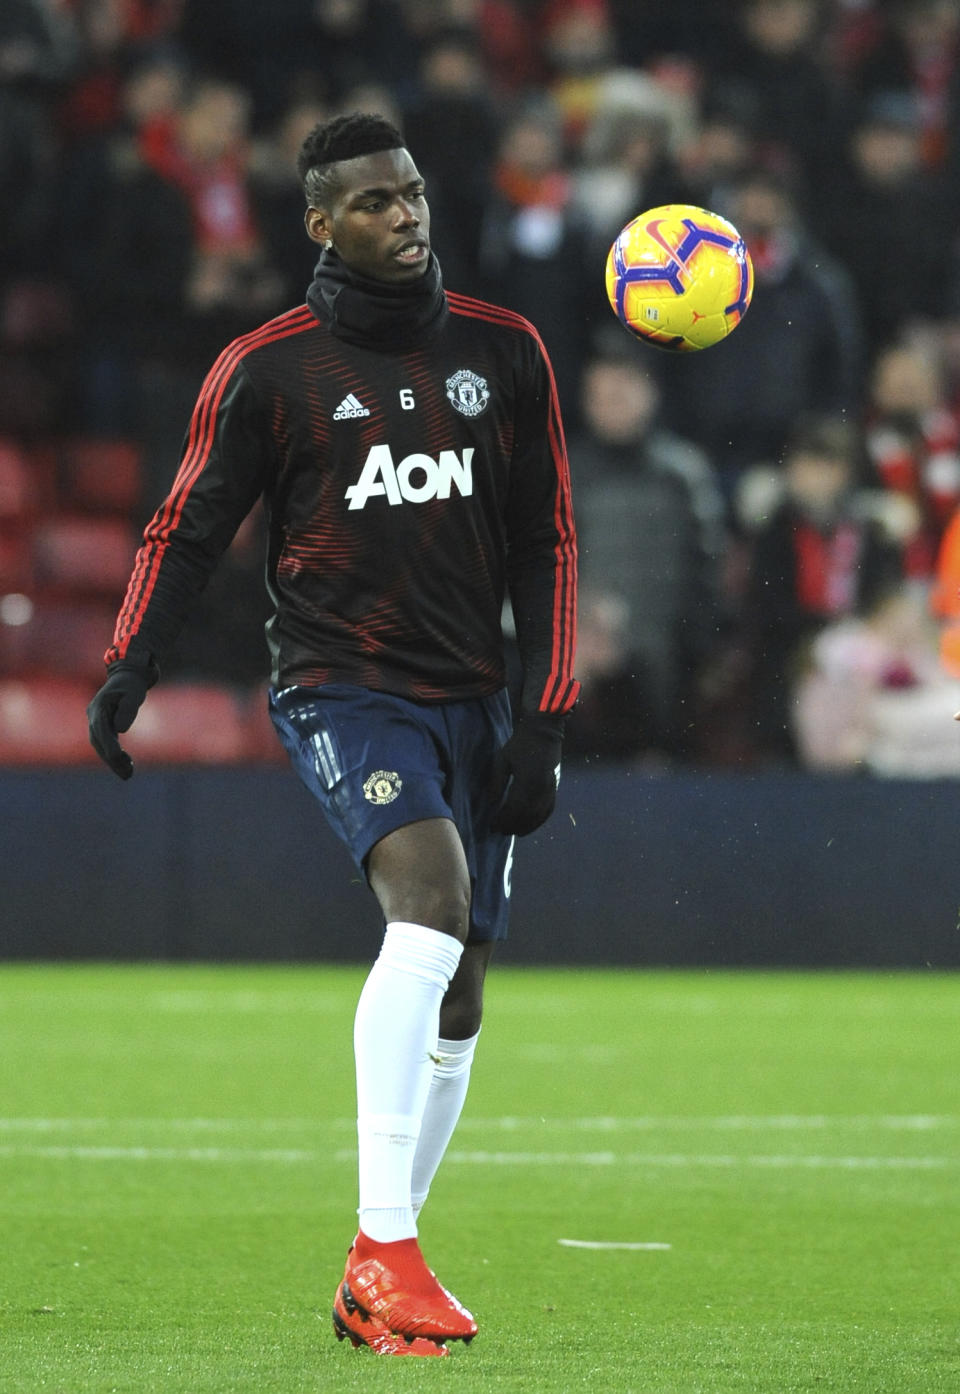 Manchester United's Paul Pogba warms up prior to the English Premier League soccer match between Liverpool and Manchester United at Anfield in Liverpool, England, Sunday, Dec. 16, 2018. (AP Photo/Rui Vieira)